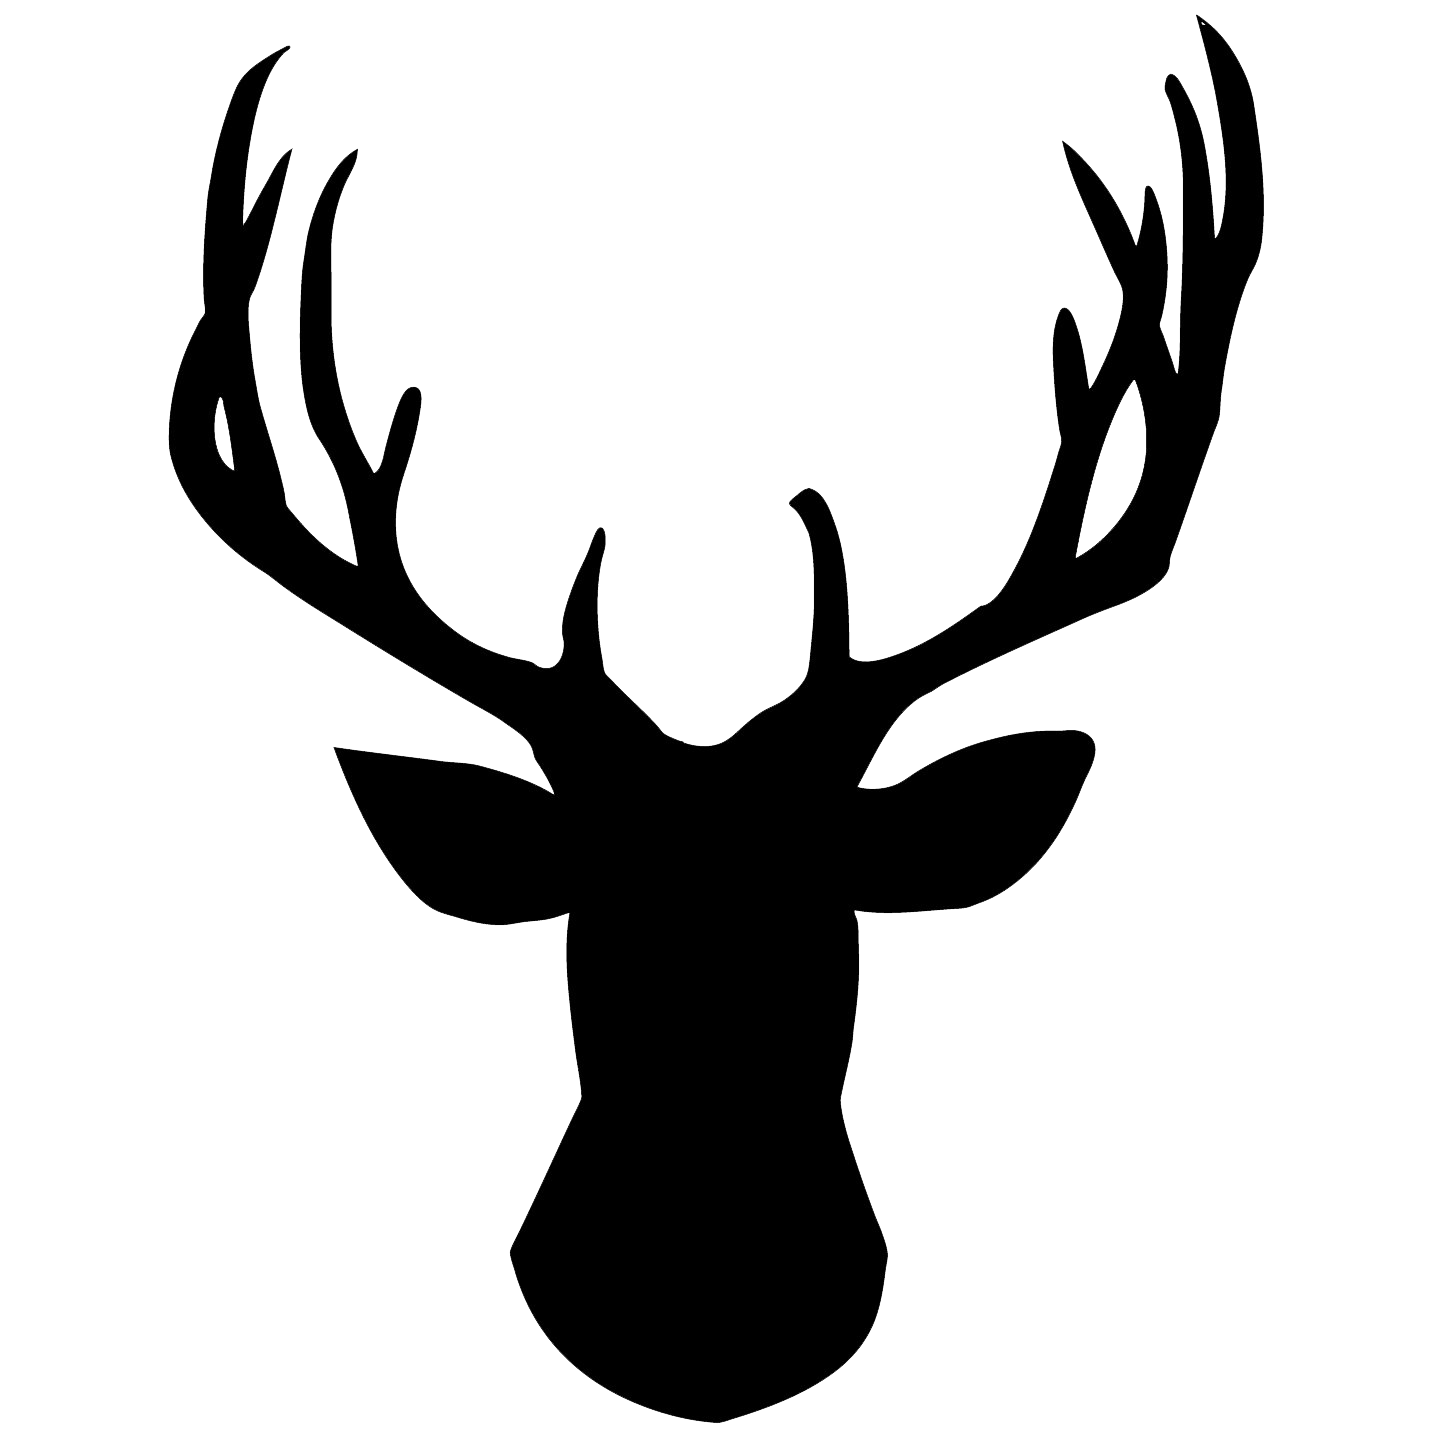 Deer Head Png Pic - Deer Head Black And White, Transparent background PNG HD thumbnail